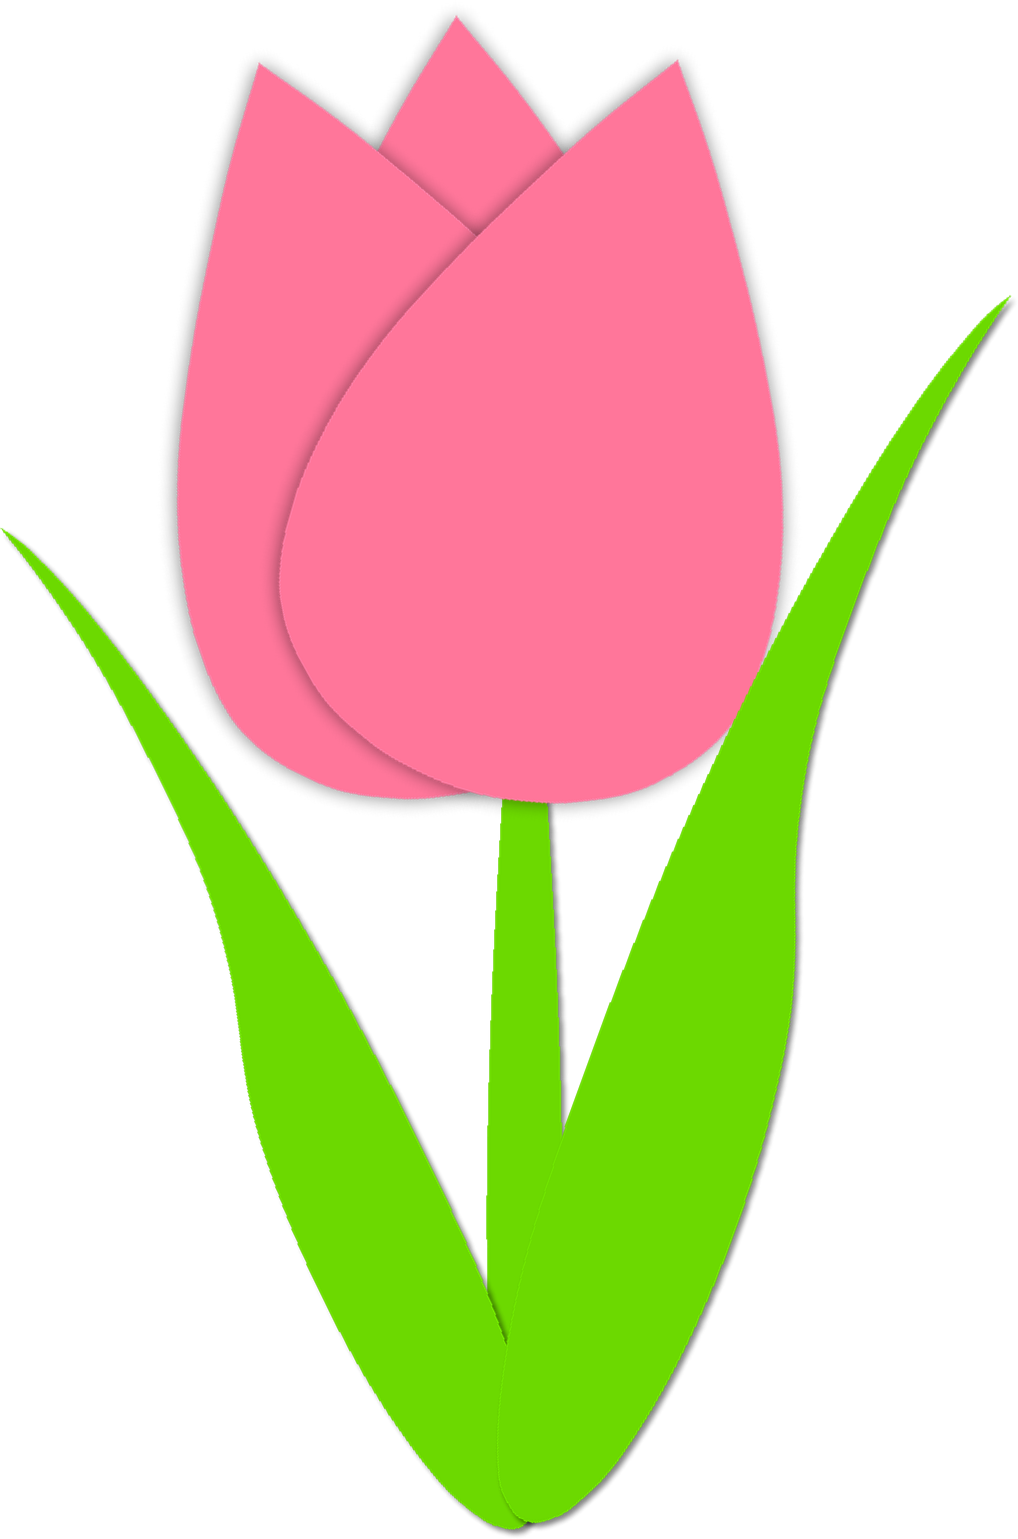 Simple tulip outline spring. Zucchini clipart marrow